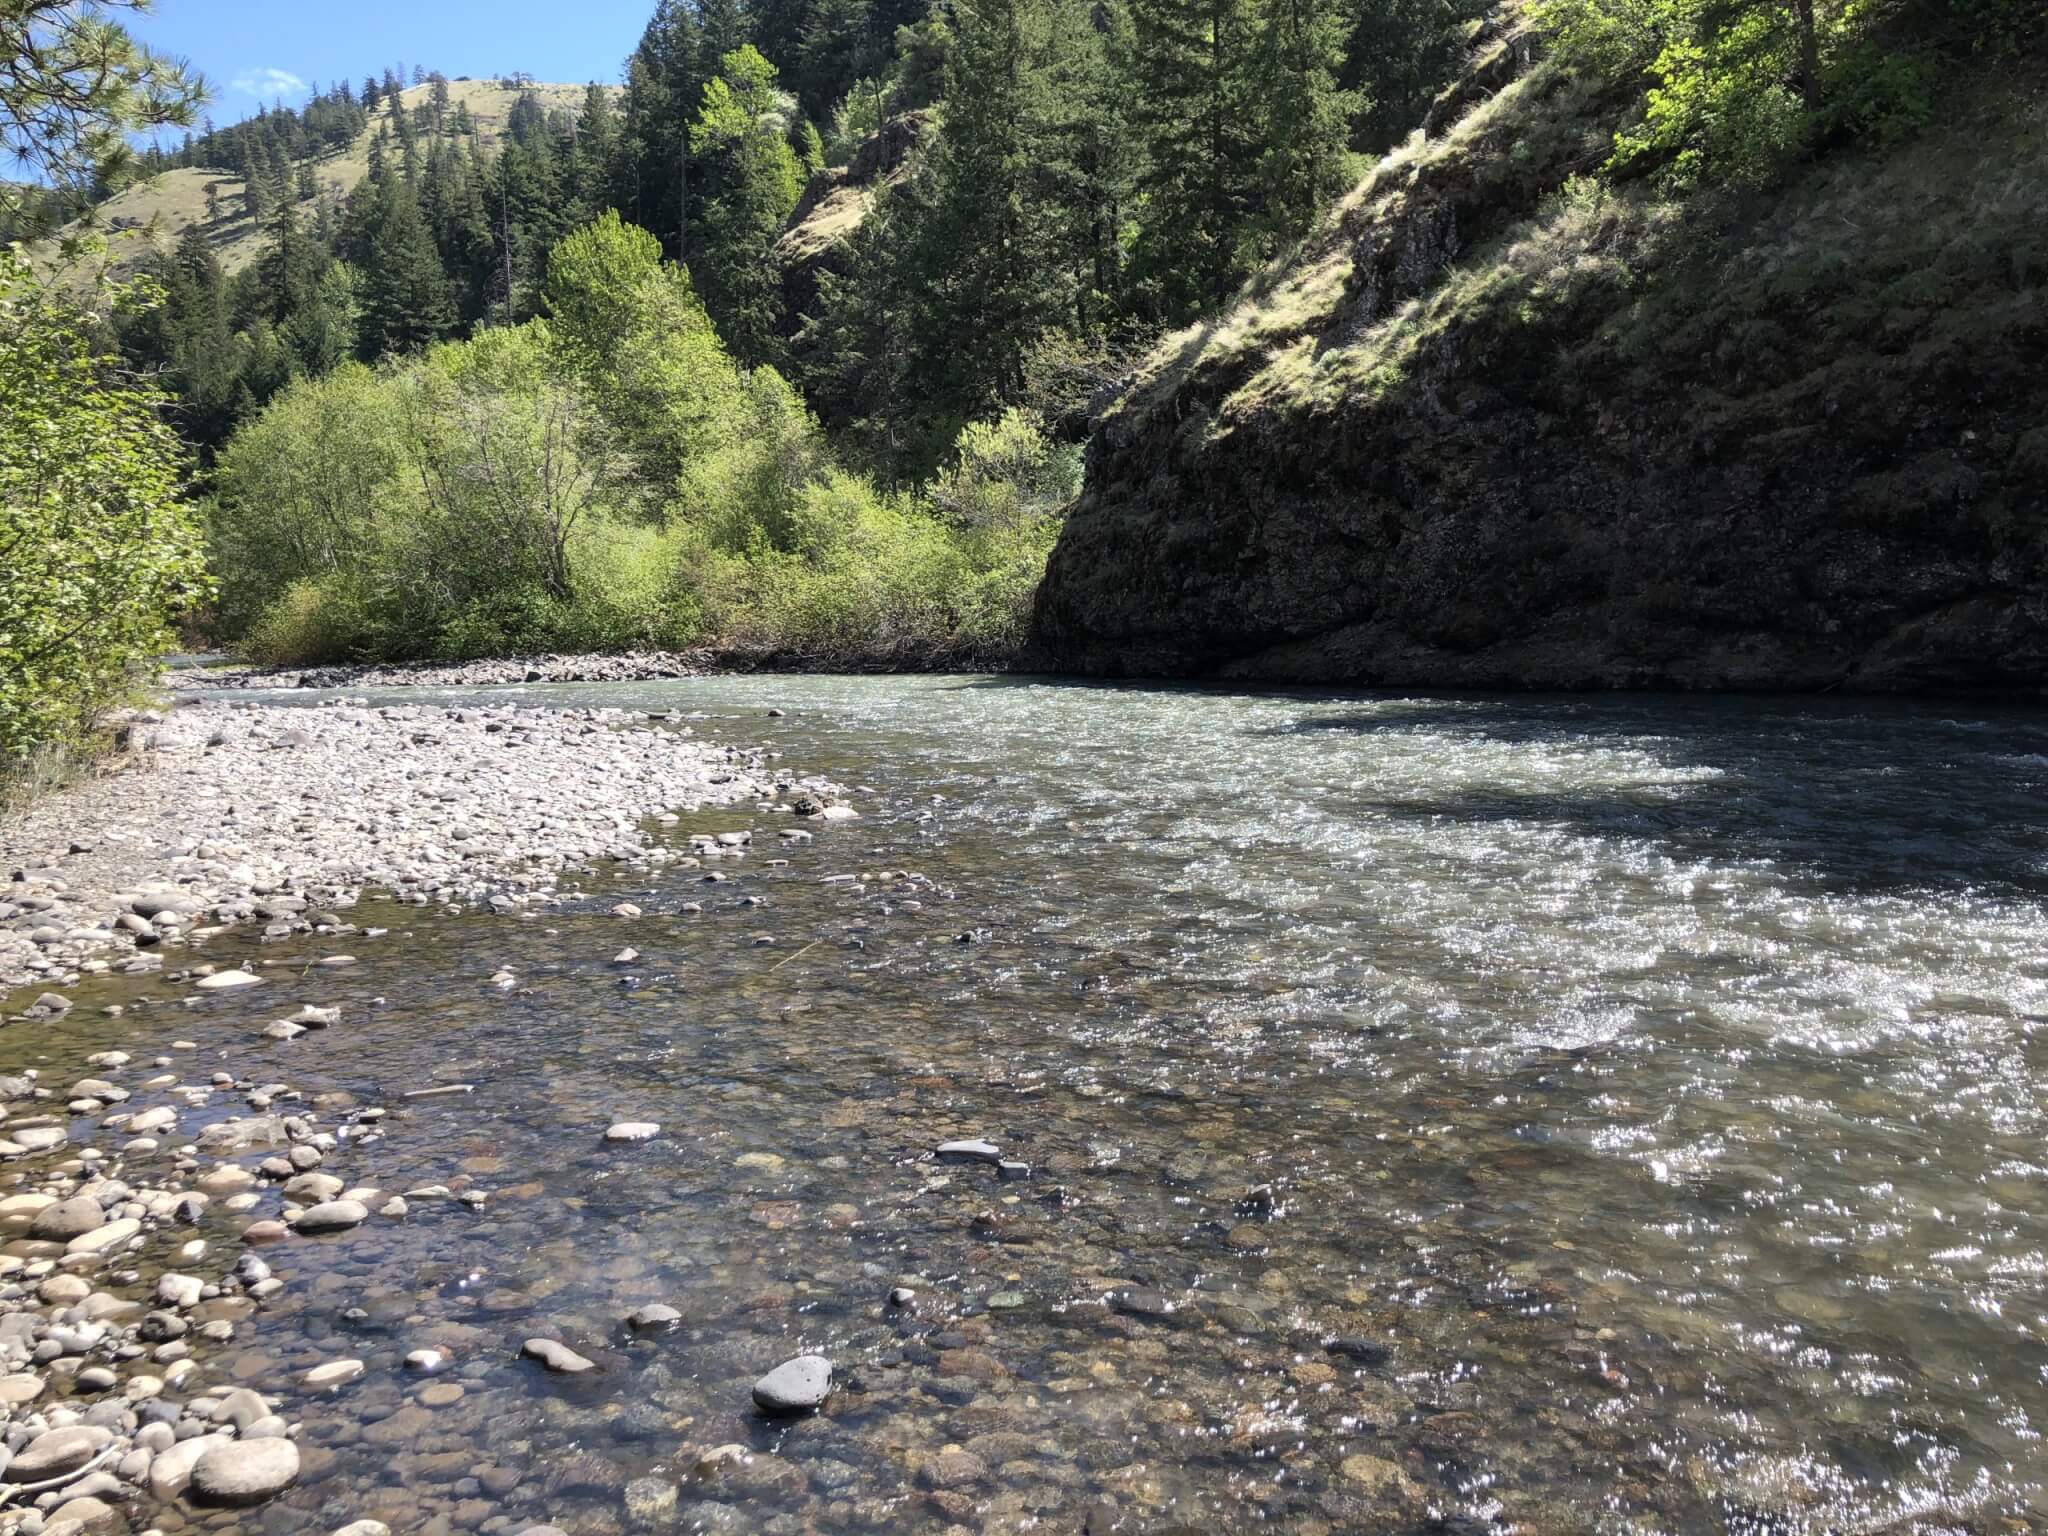 Awesome Campgrounds in the Pacific Northwest and Northern California-American Forks - Bumping River View